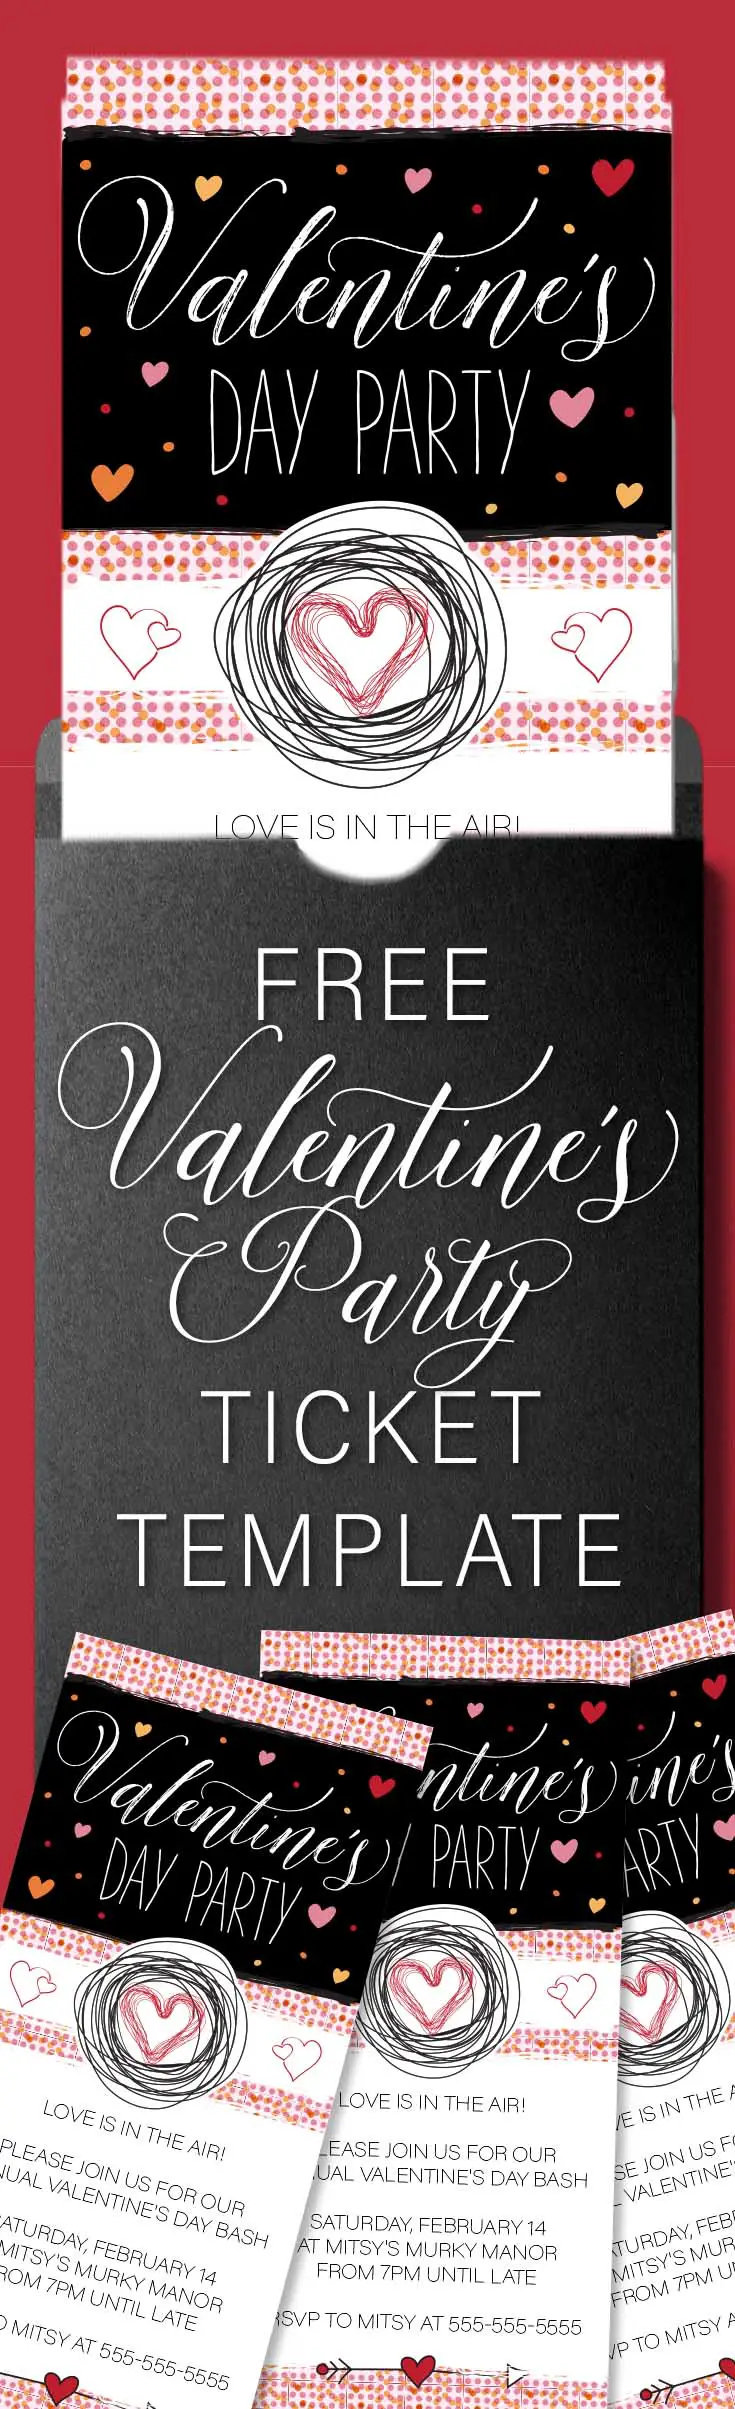 Valentine S Day Party Invitation Template Free